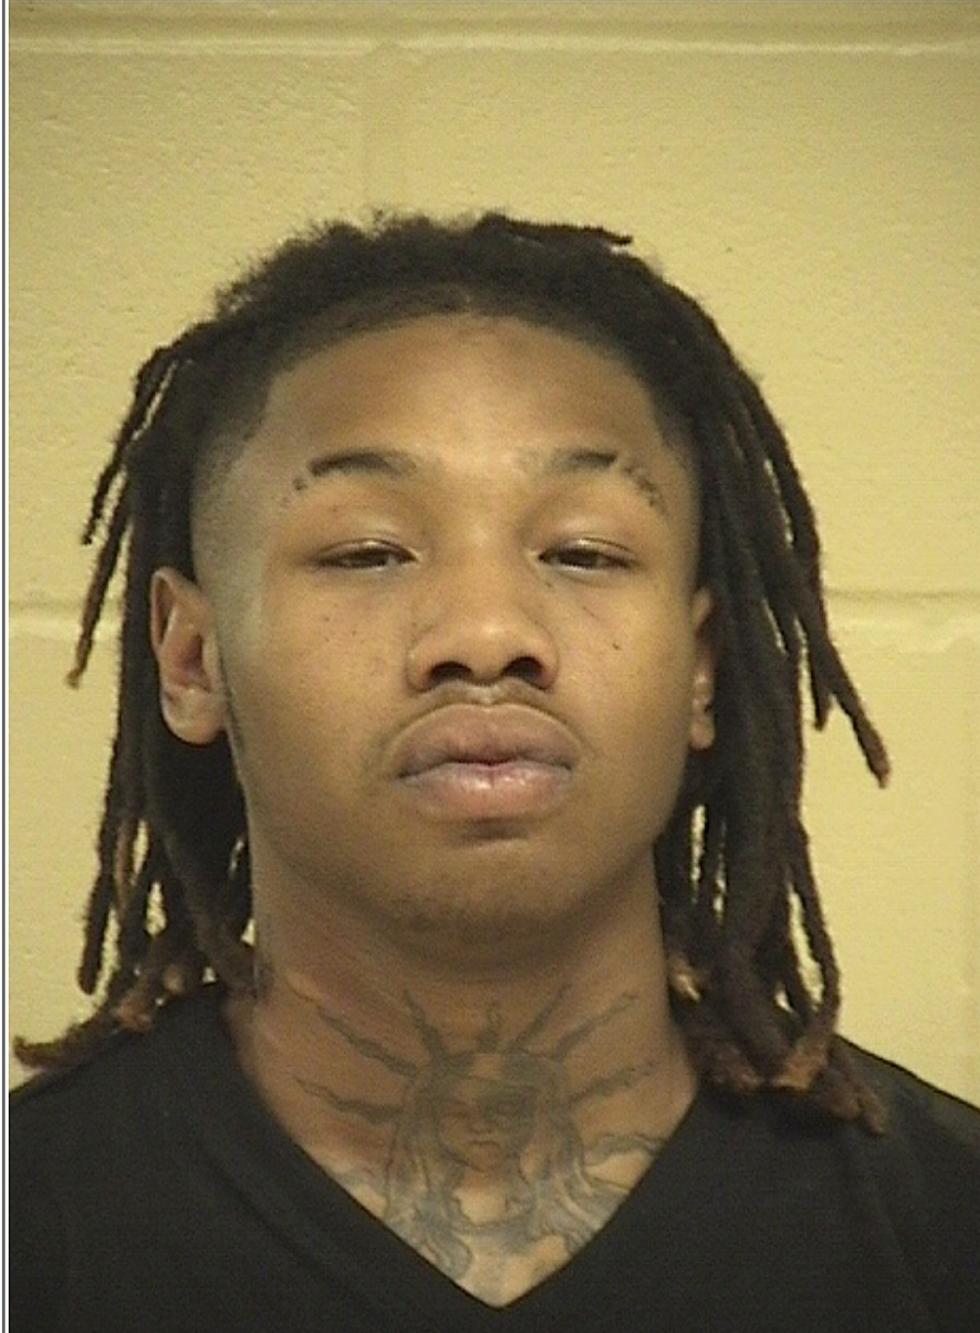 Shreveport Police Need Help Finding a Shooting Suspect